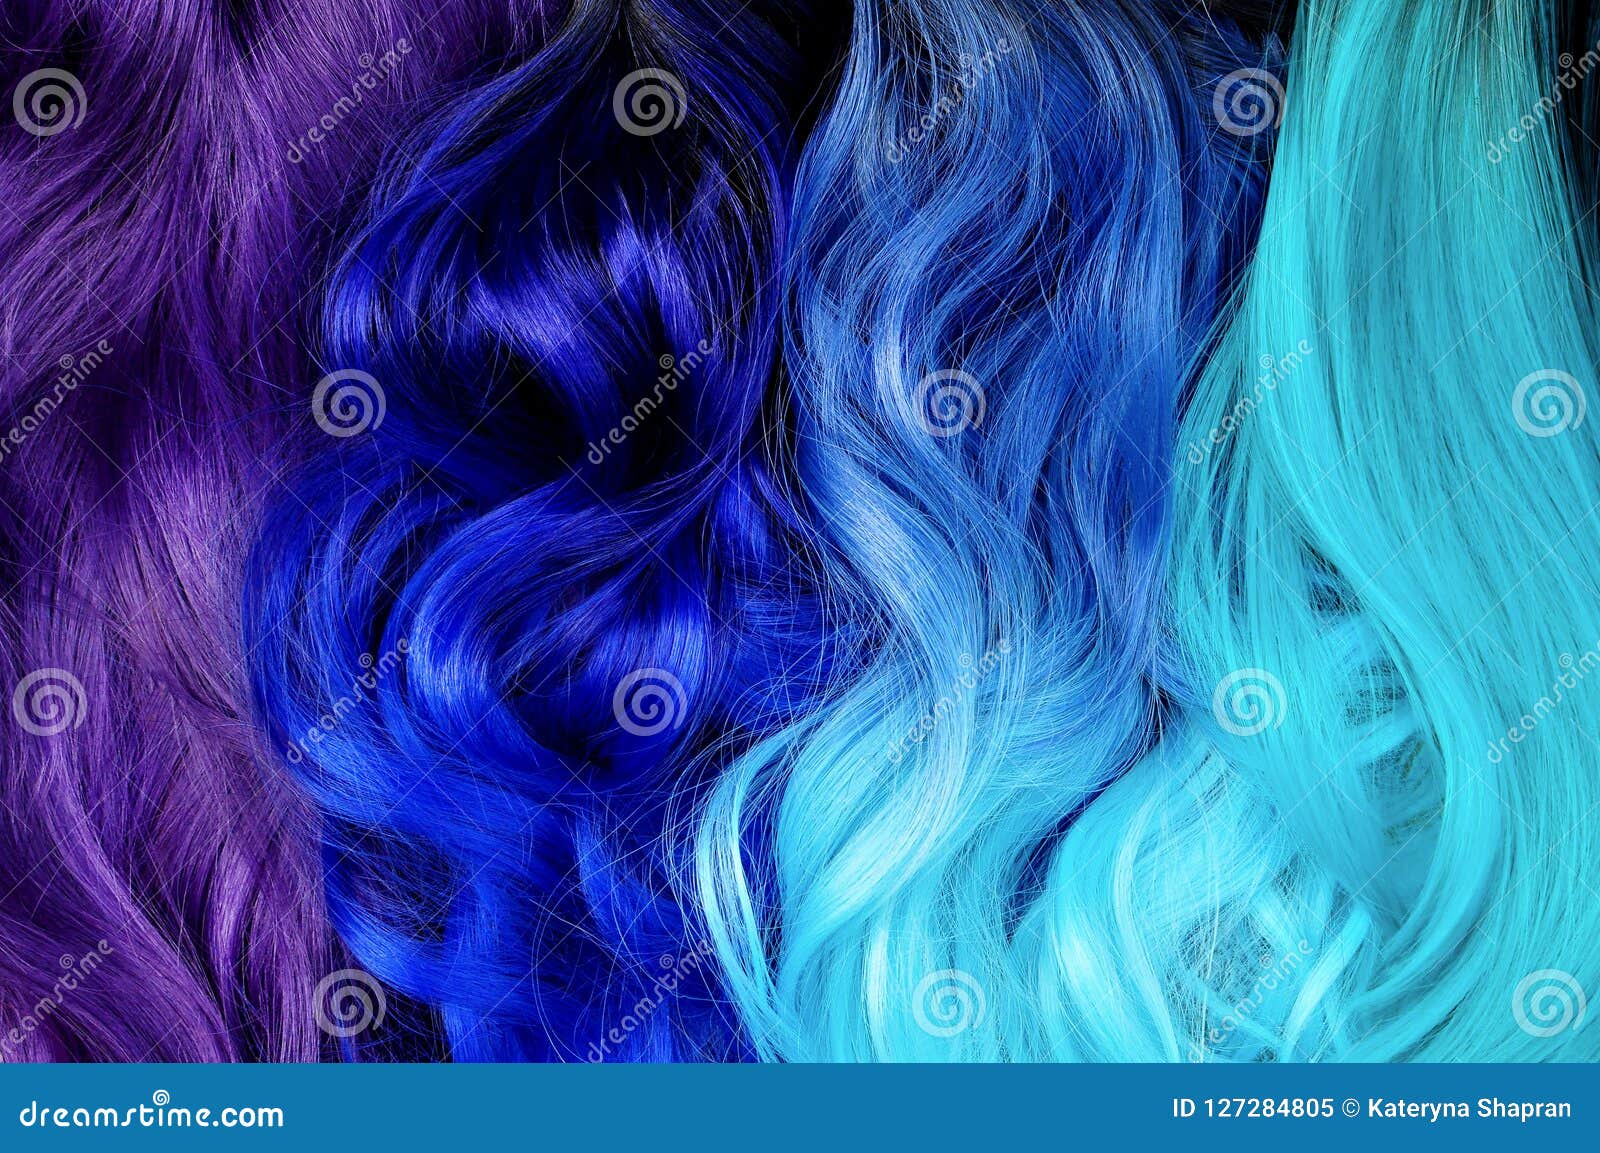 Blue and Turquoise Hair Styles for Different Hair Lengths - wide 4